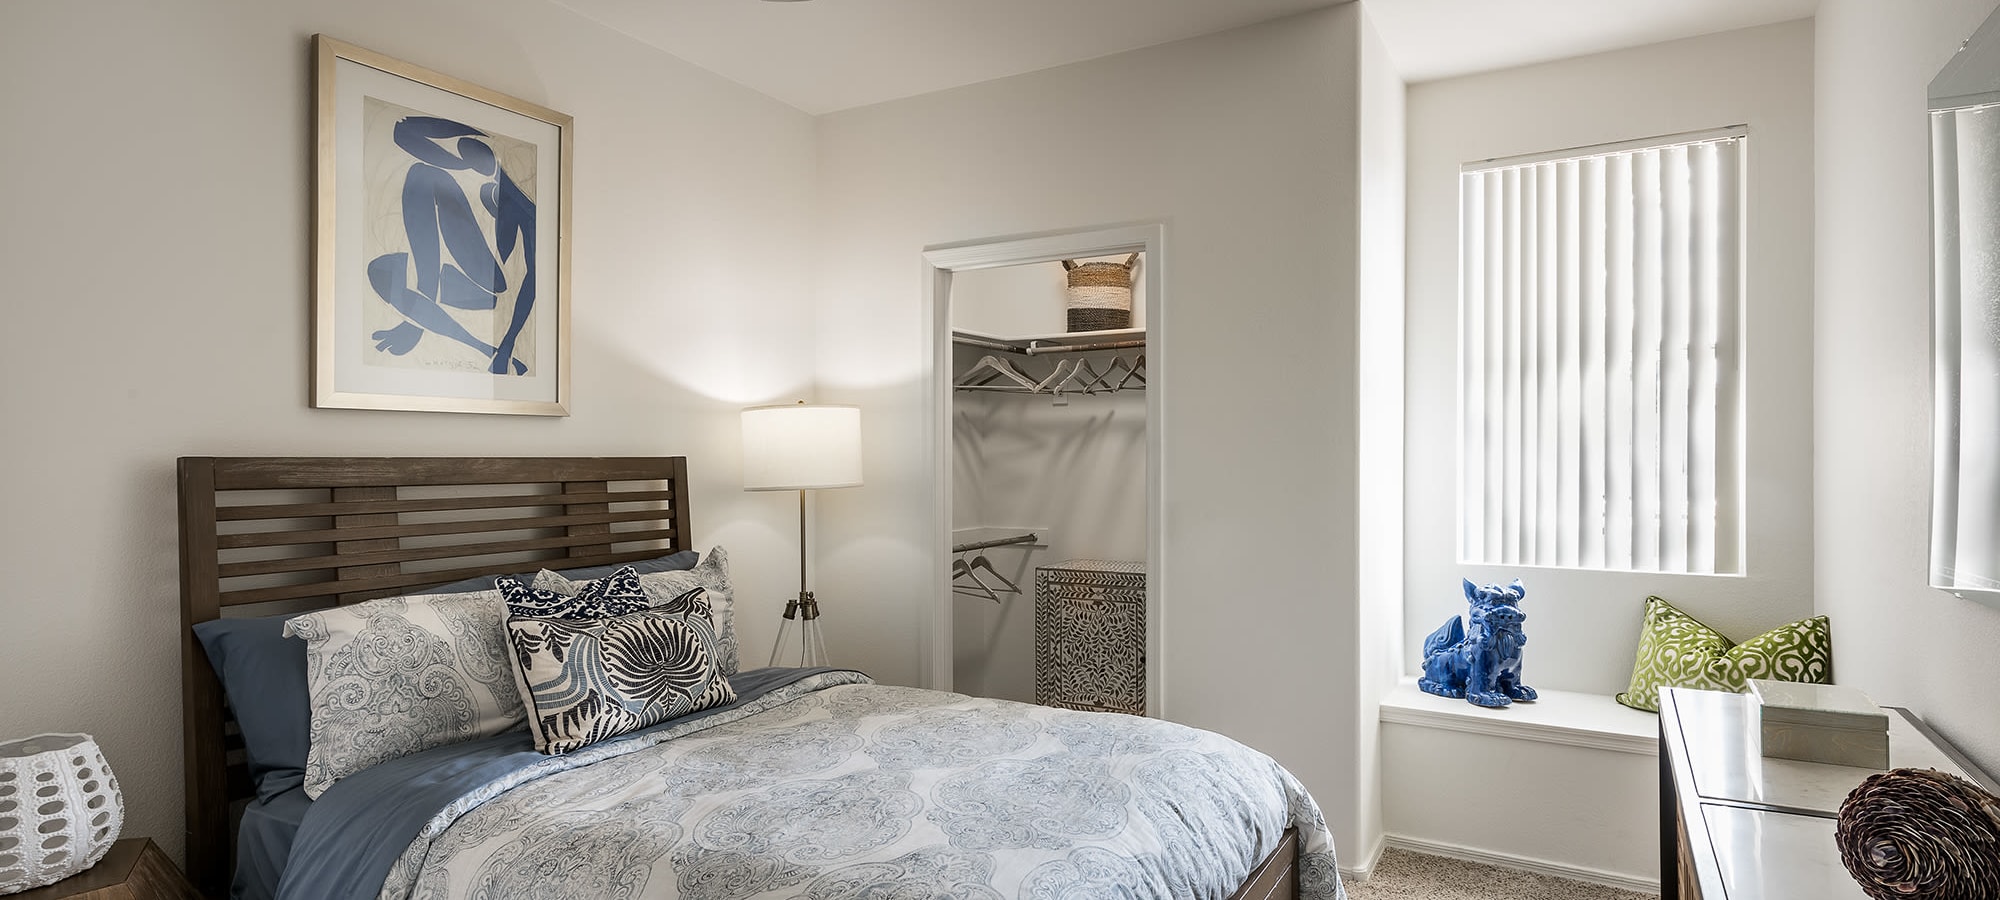 Bedroom at The Reserve at Gilbert Towne Centre in Gilbert, Arizona